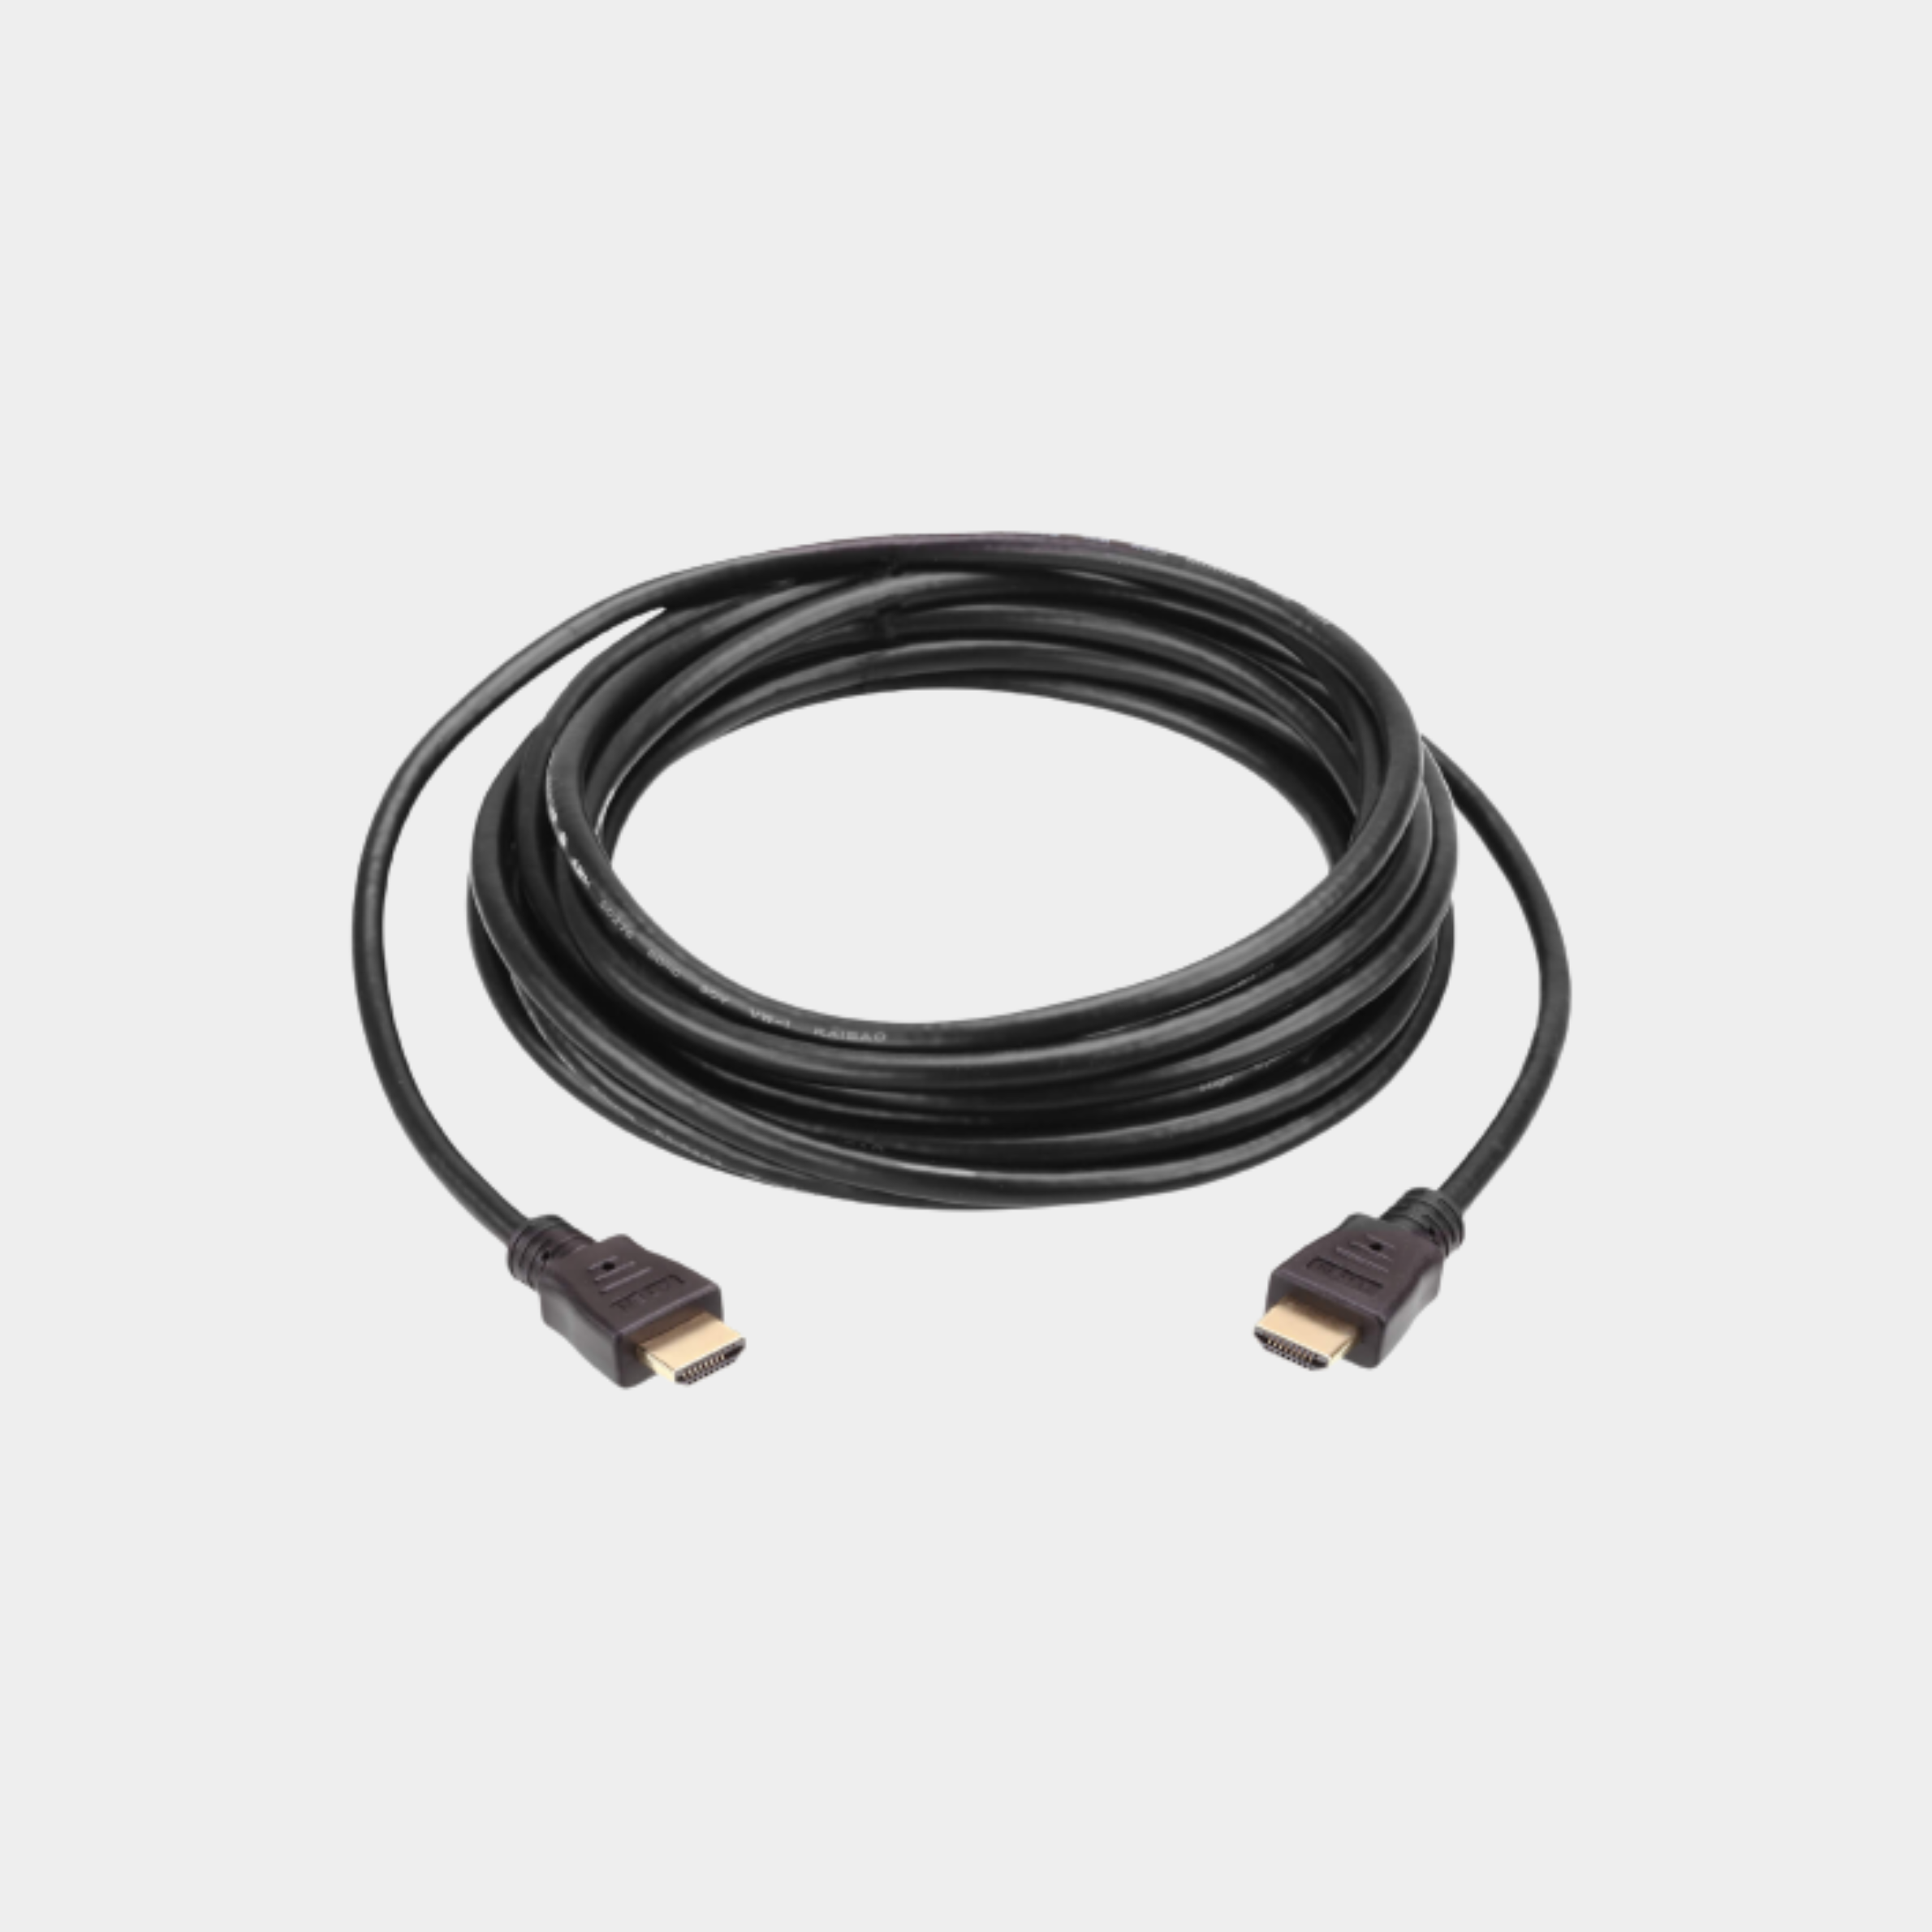 Aten 20 m High Speed HDMI Cable with Ethernet(ATEN 2L-7D20H)